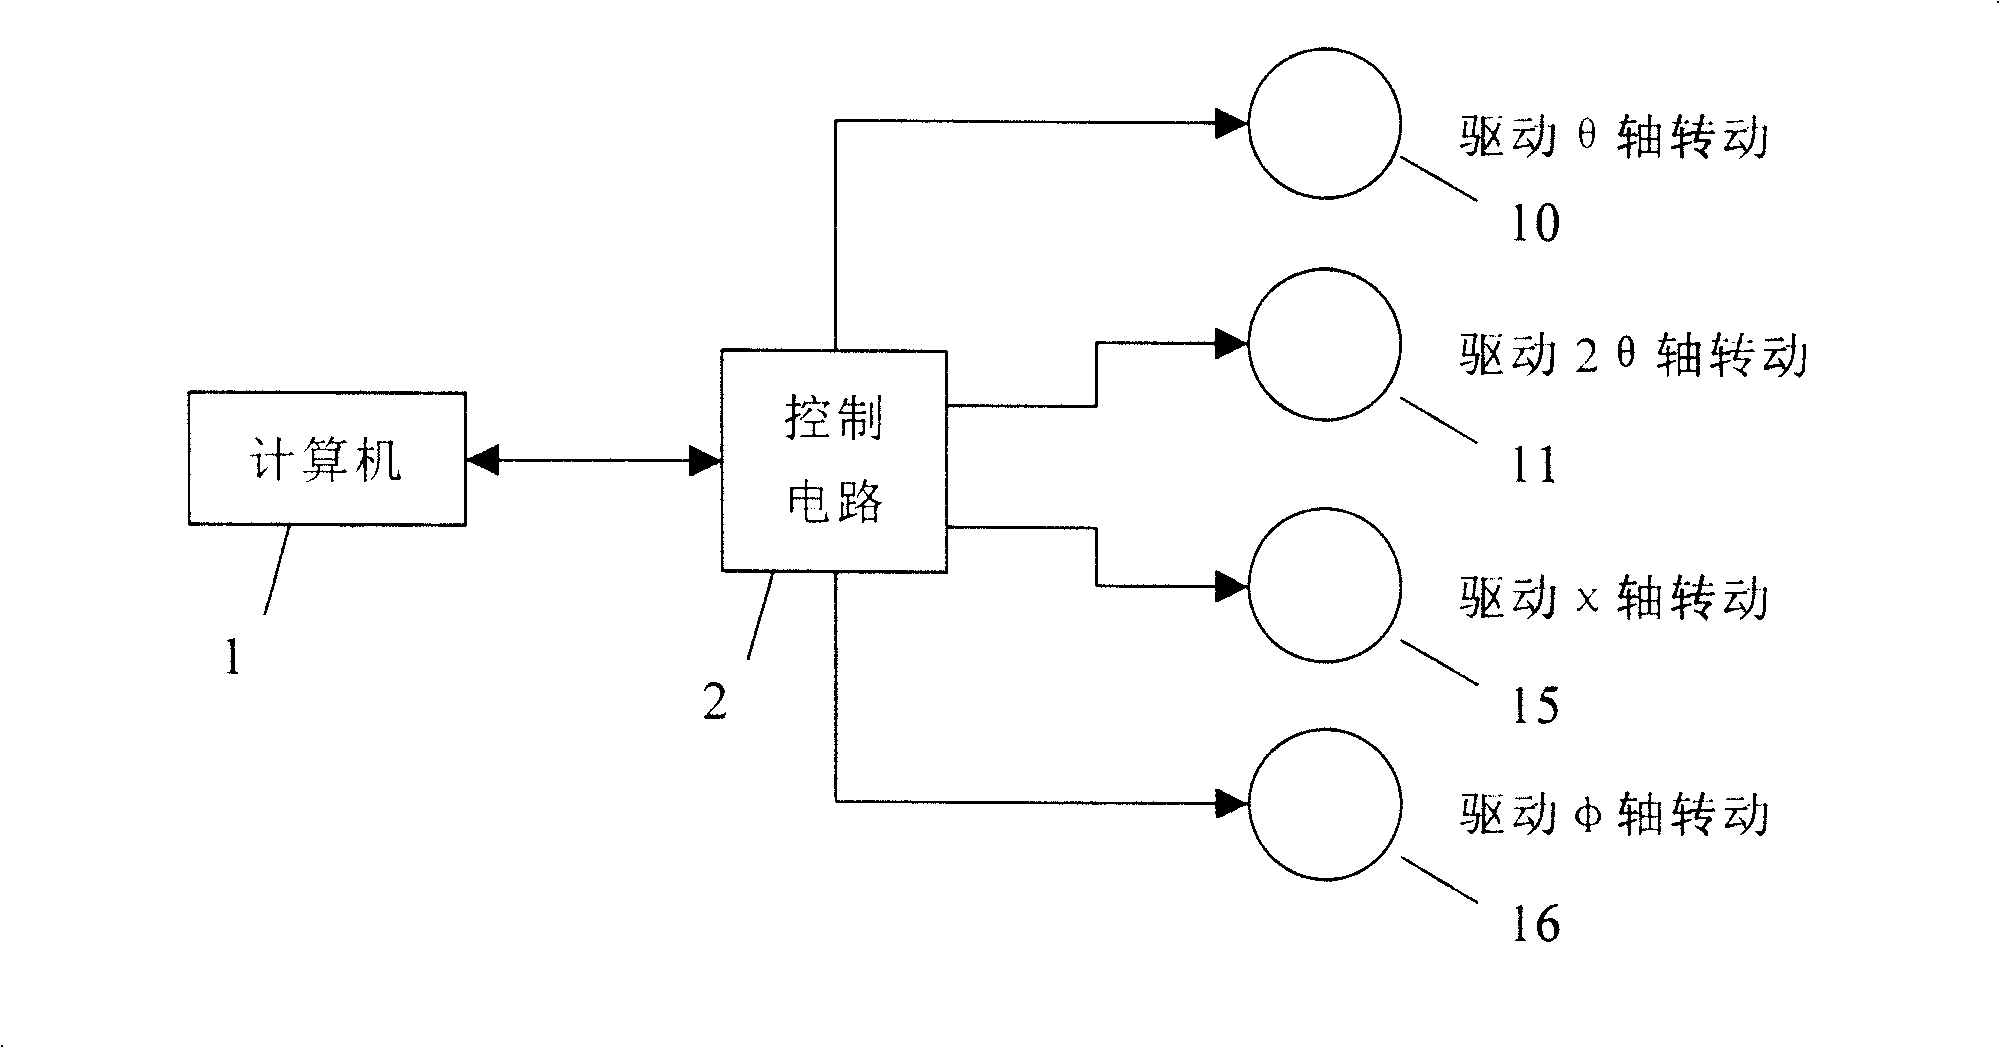 System for acquisition and processing of x-ray diffraction data